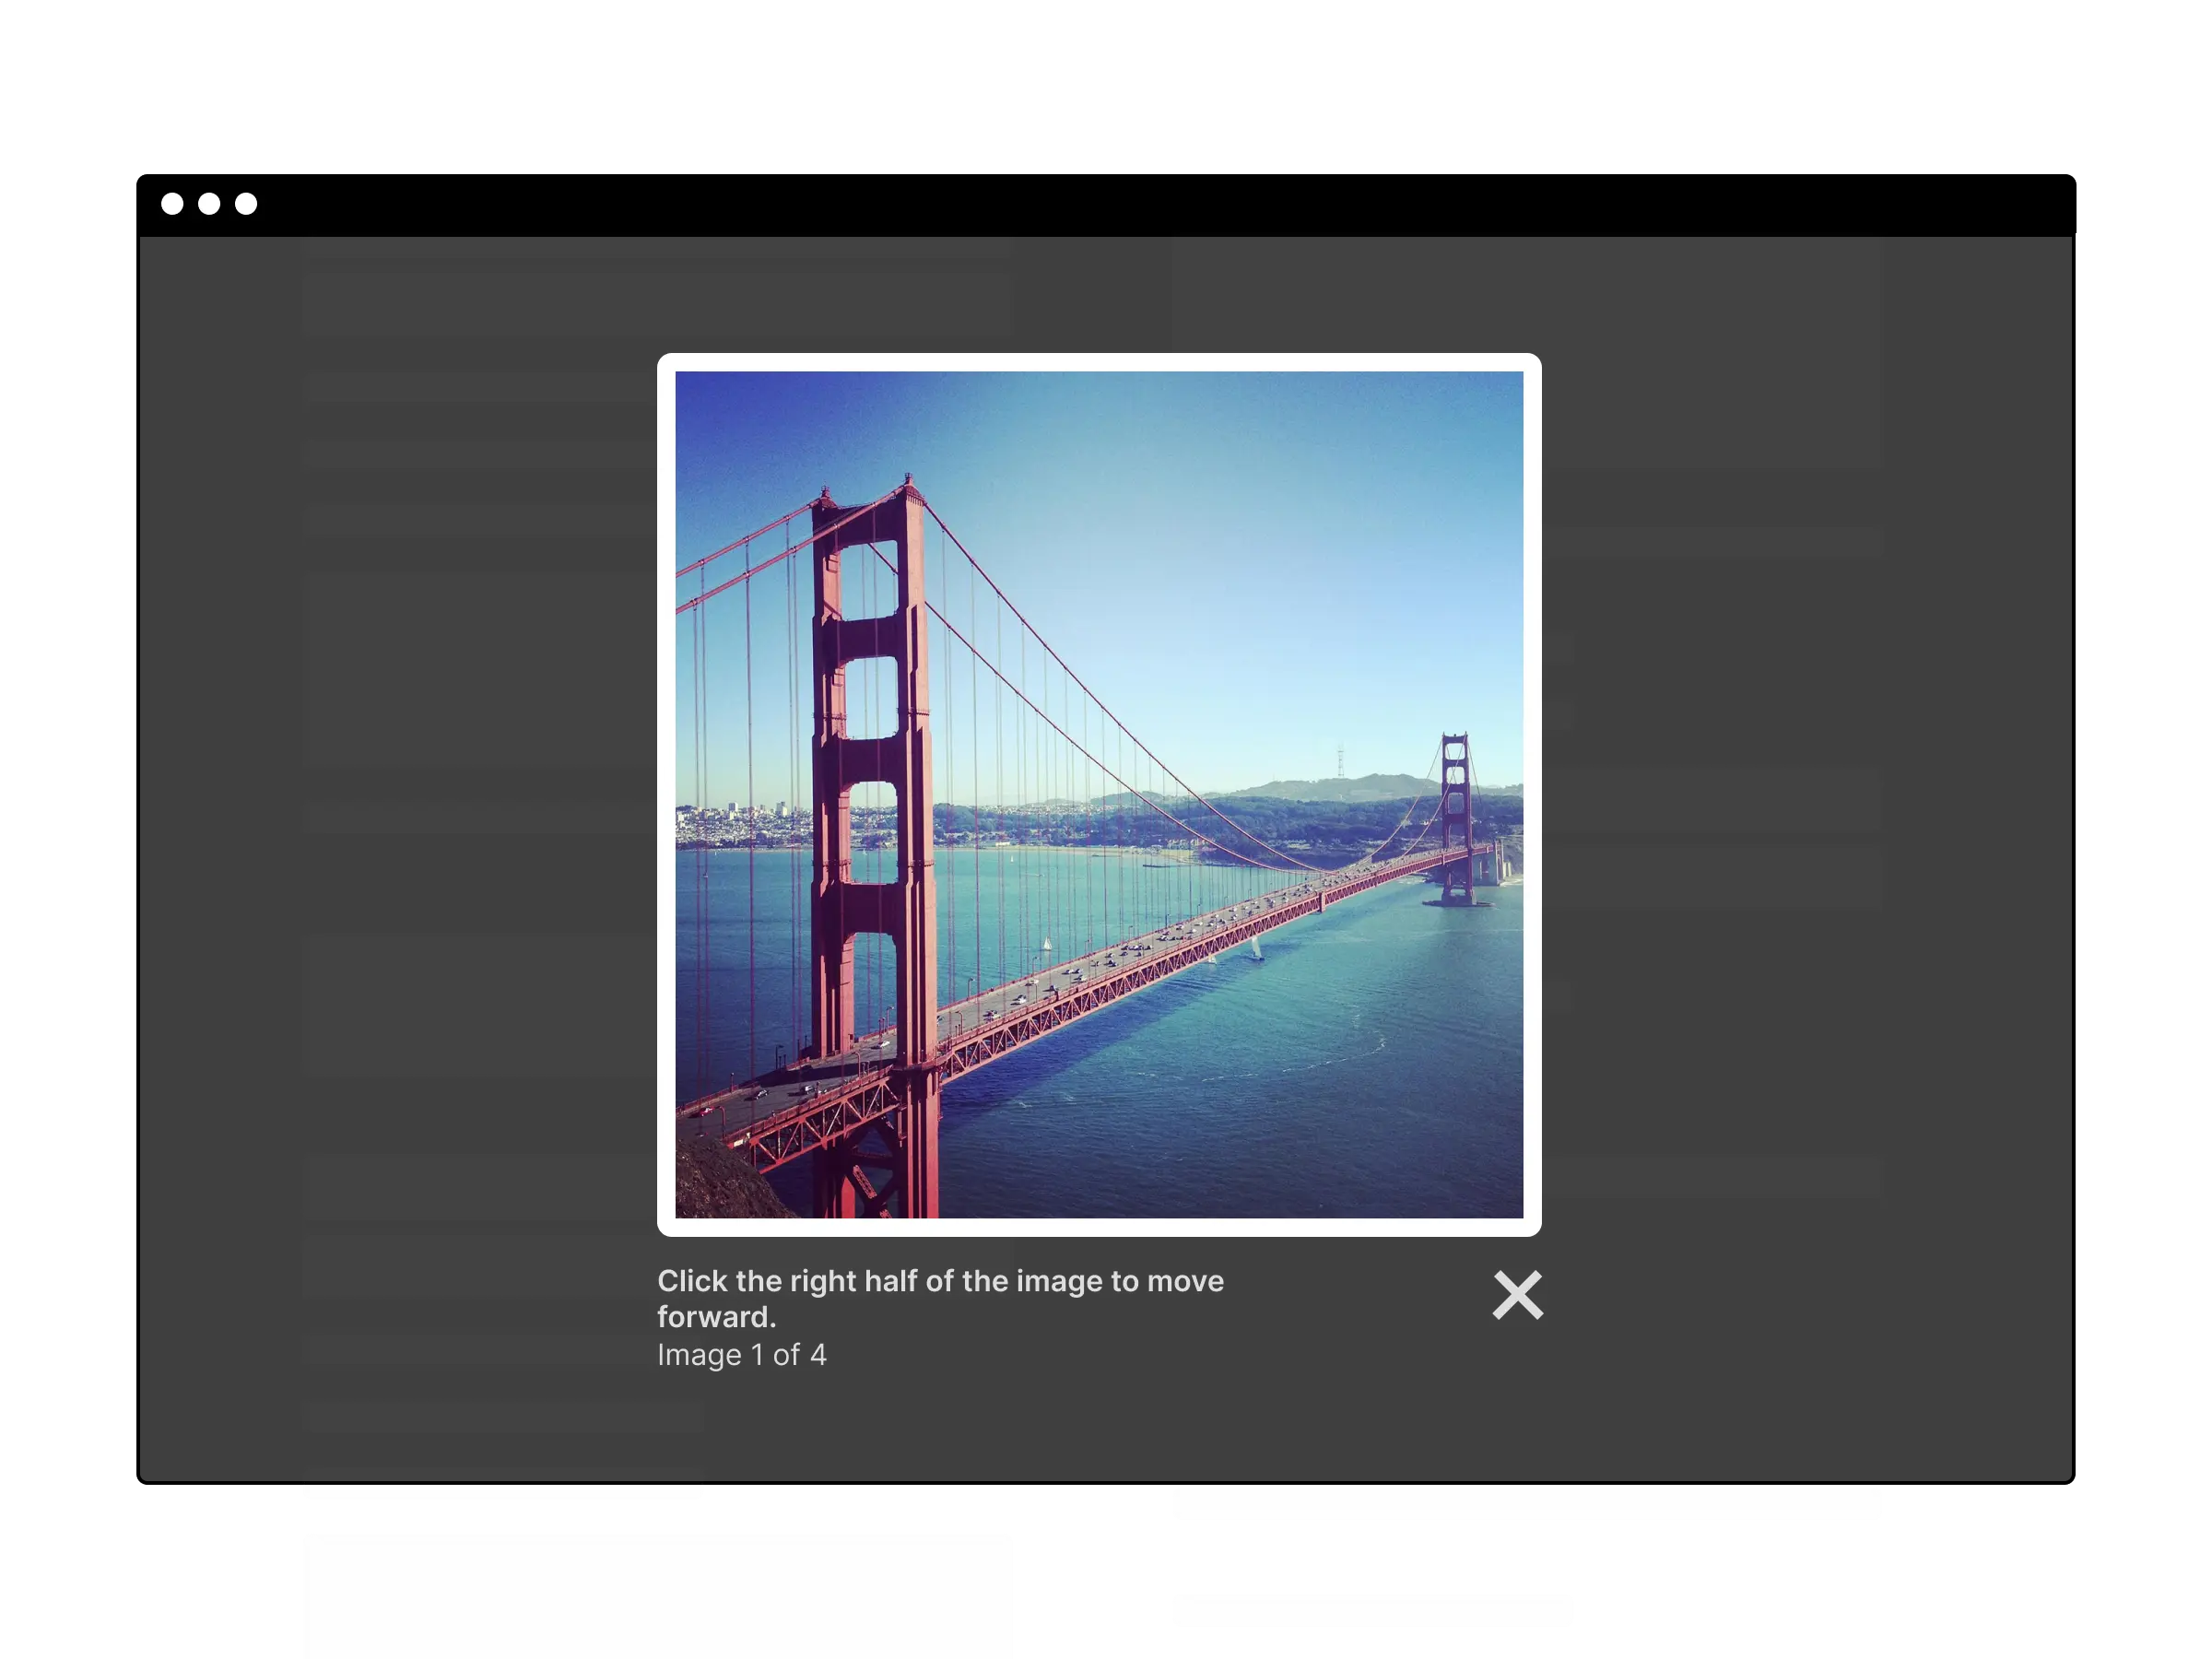 an image of the Golden Gate Bridge in a white frame that is overlaid on top of a website that has been dimmed by an overlay